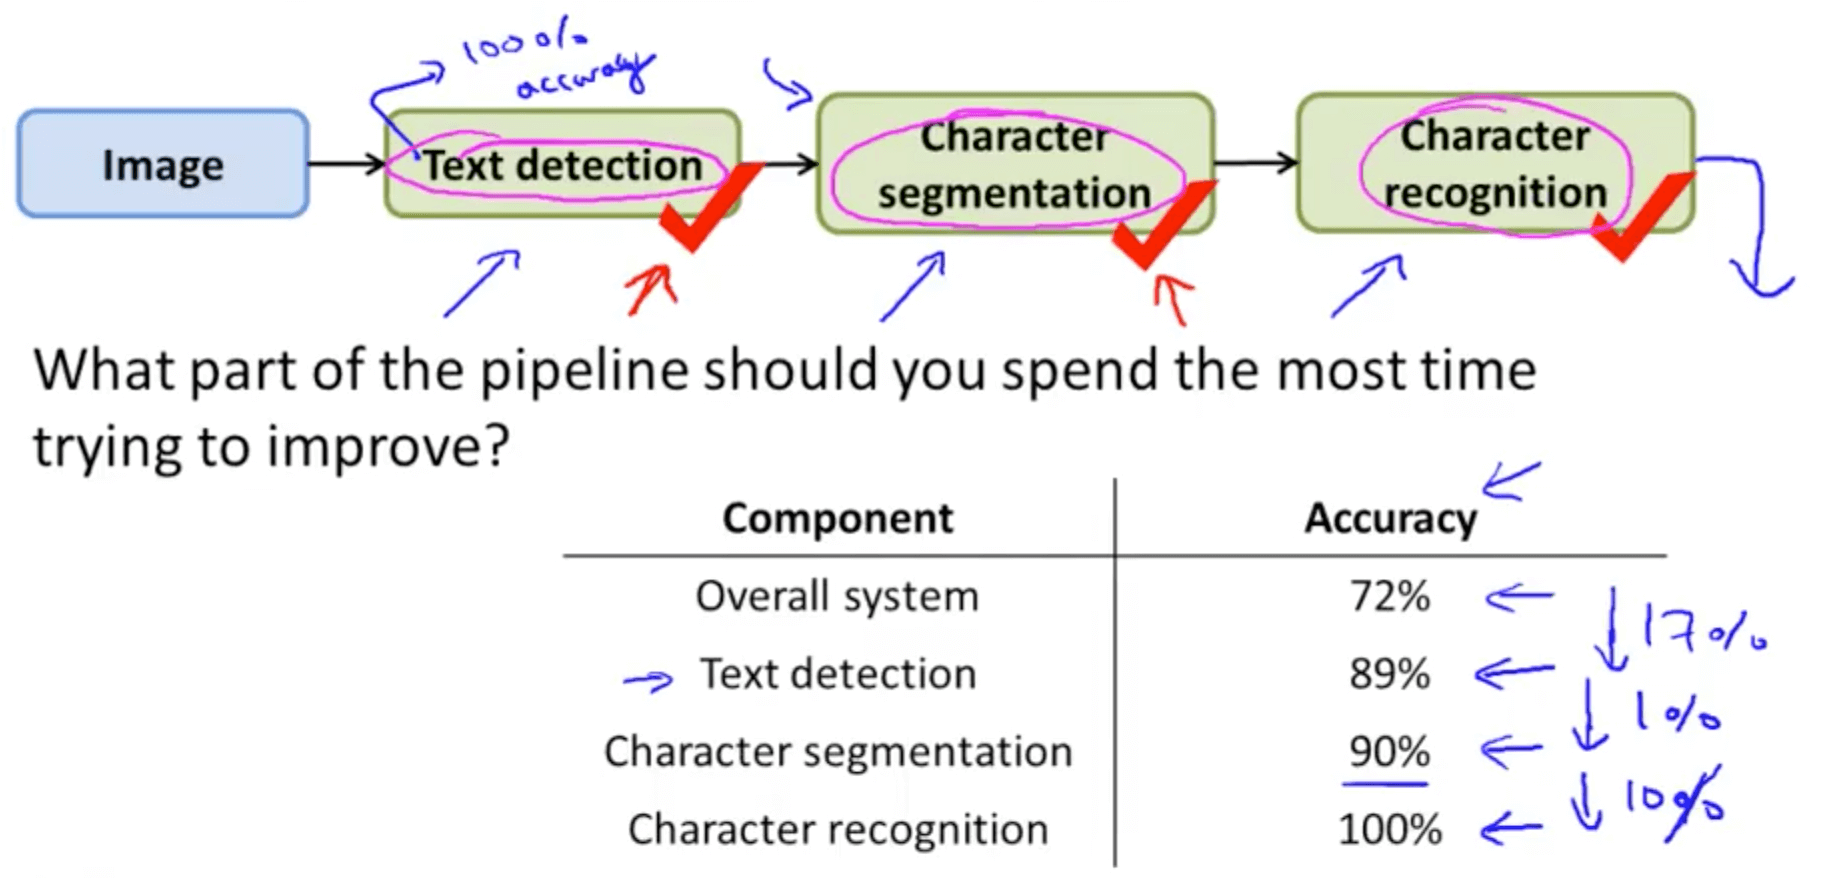 character recognition using machine learning